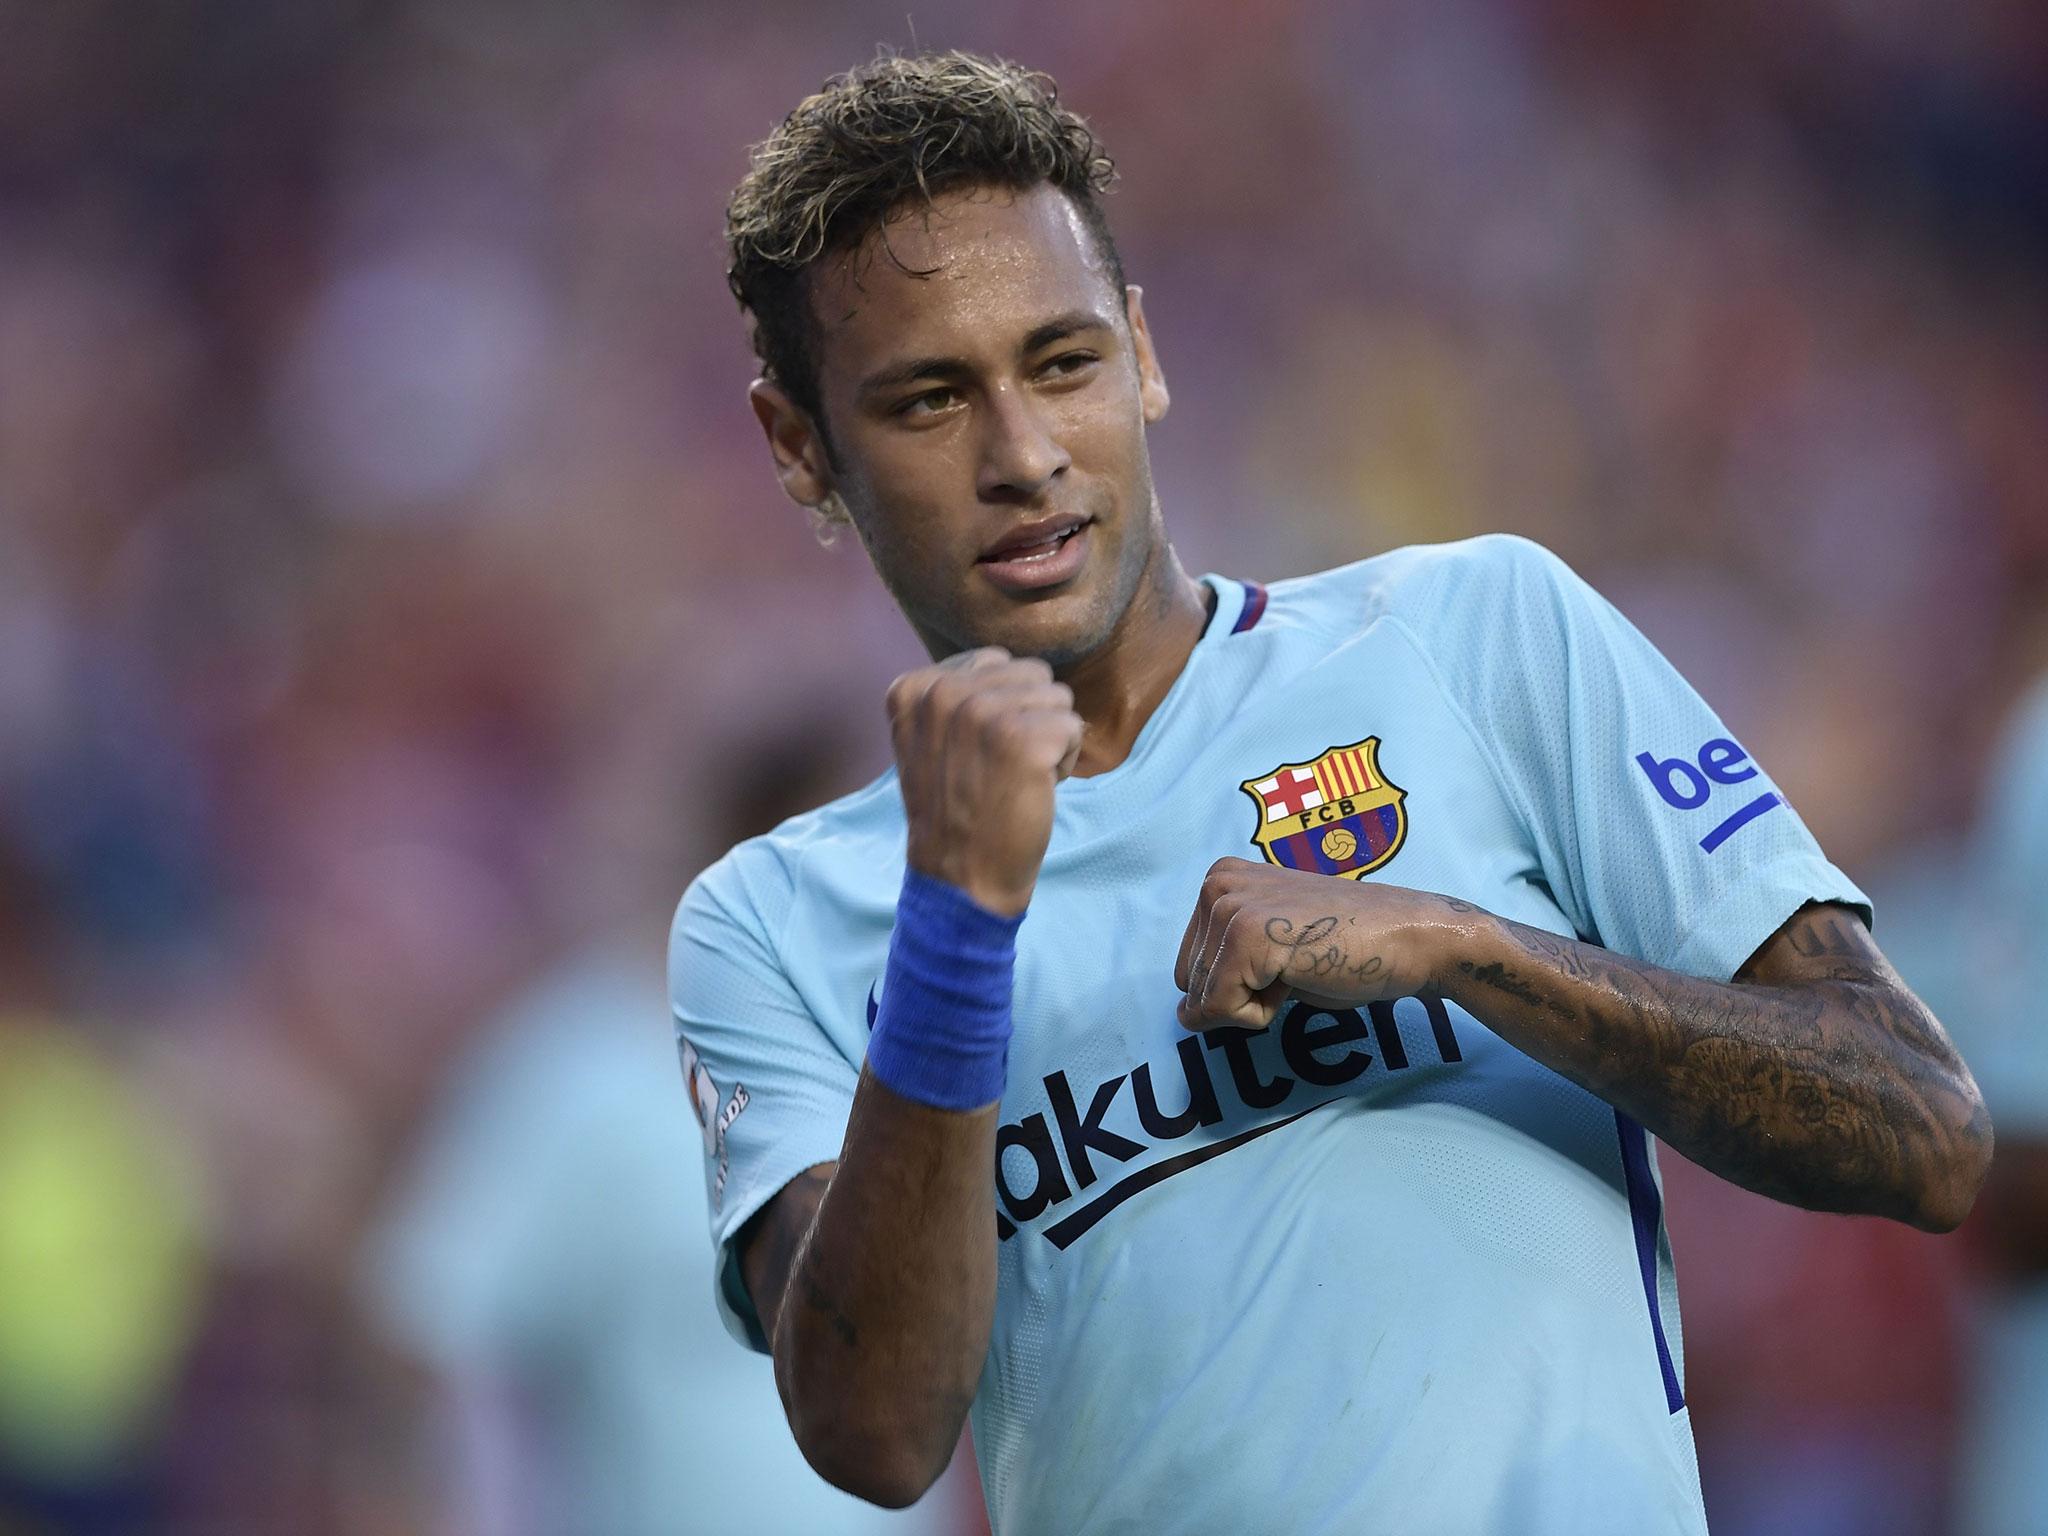 Neymar scored the only goal of the game as United fell to their first defeat of the tour